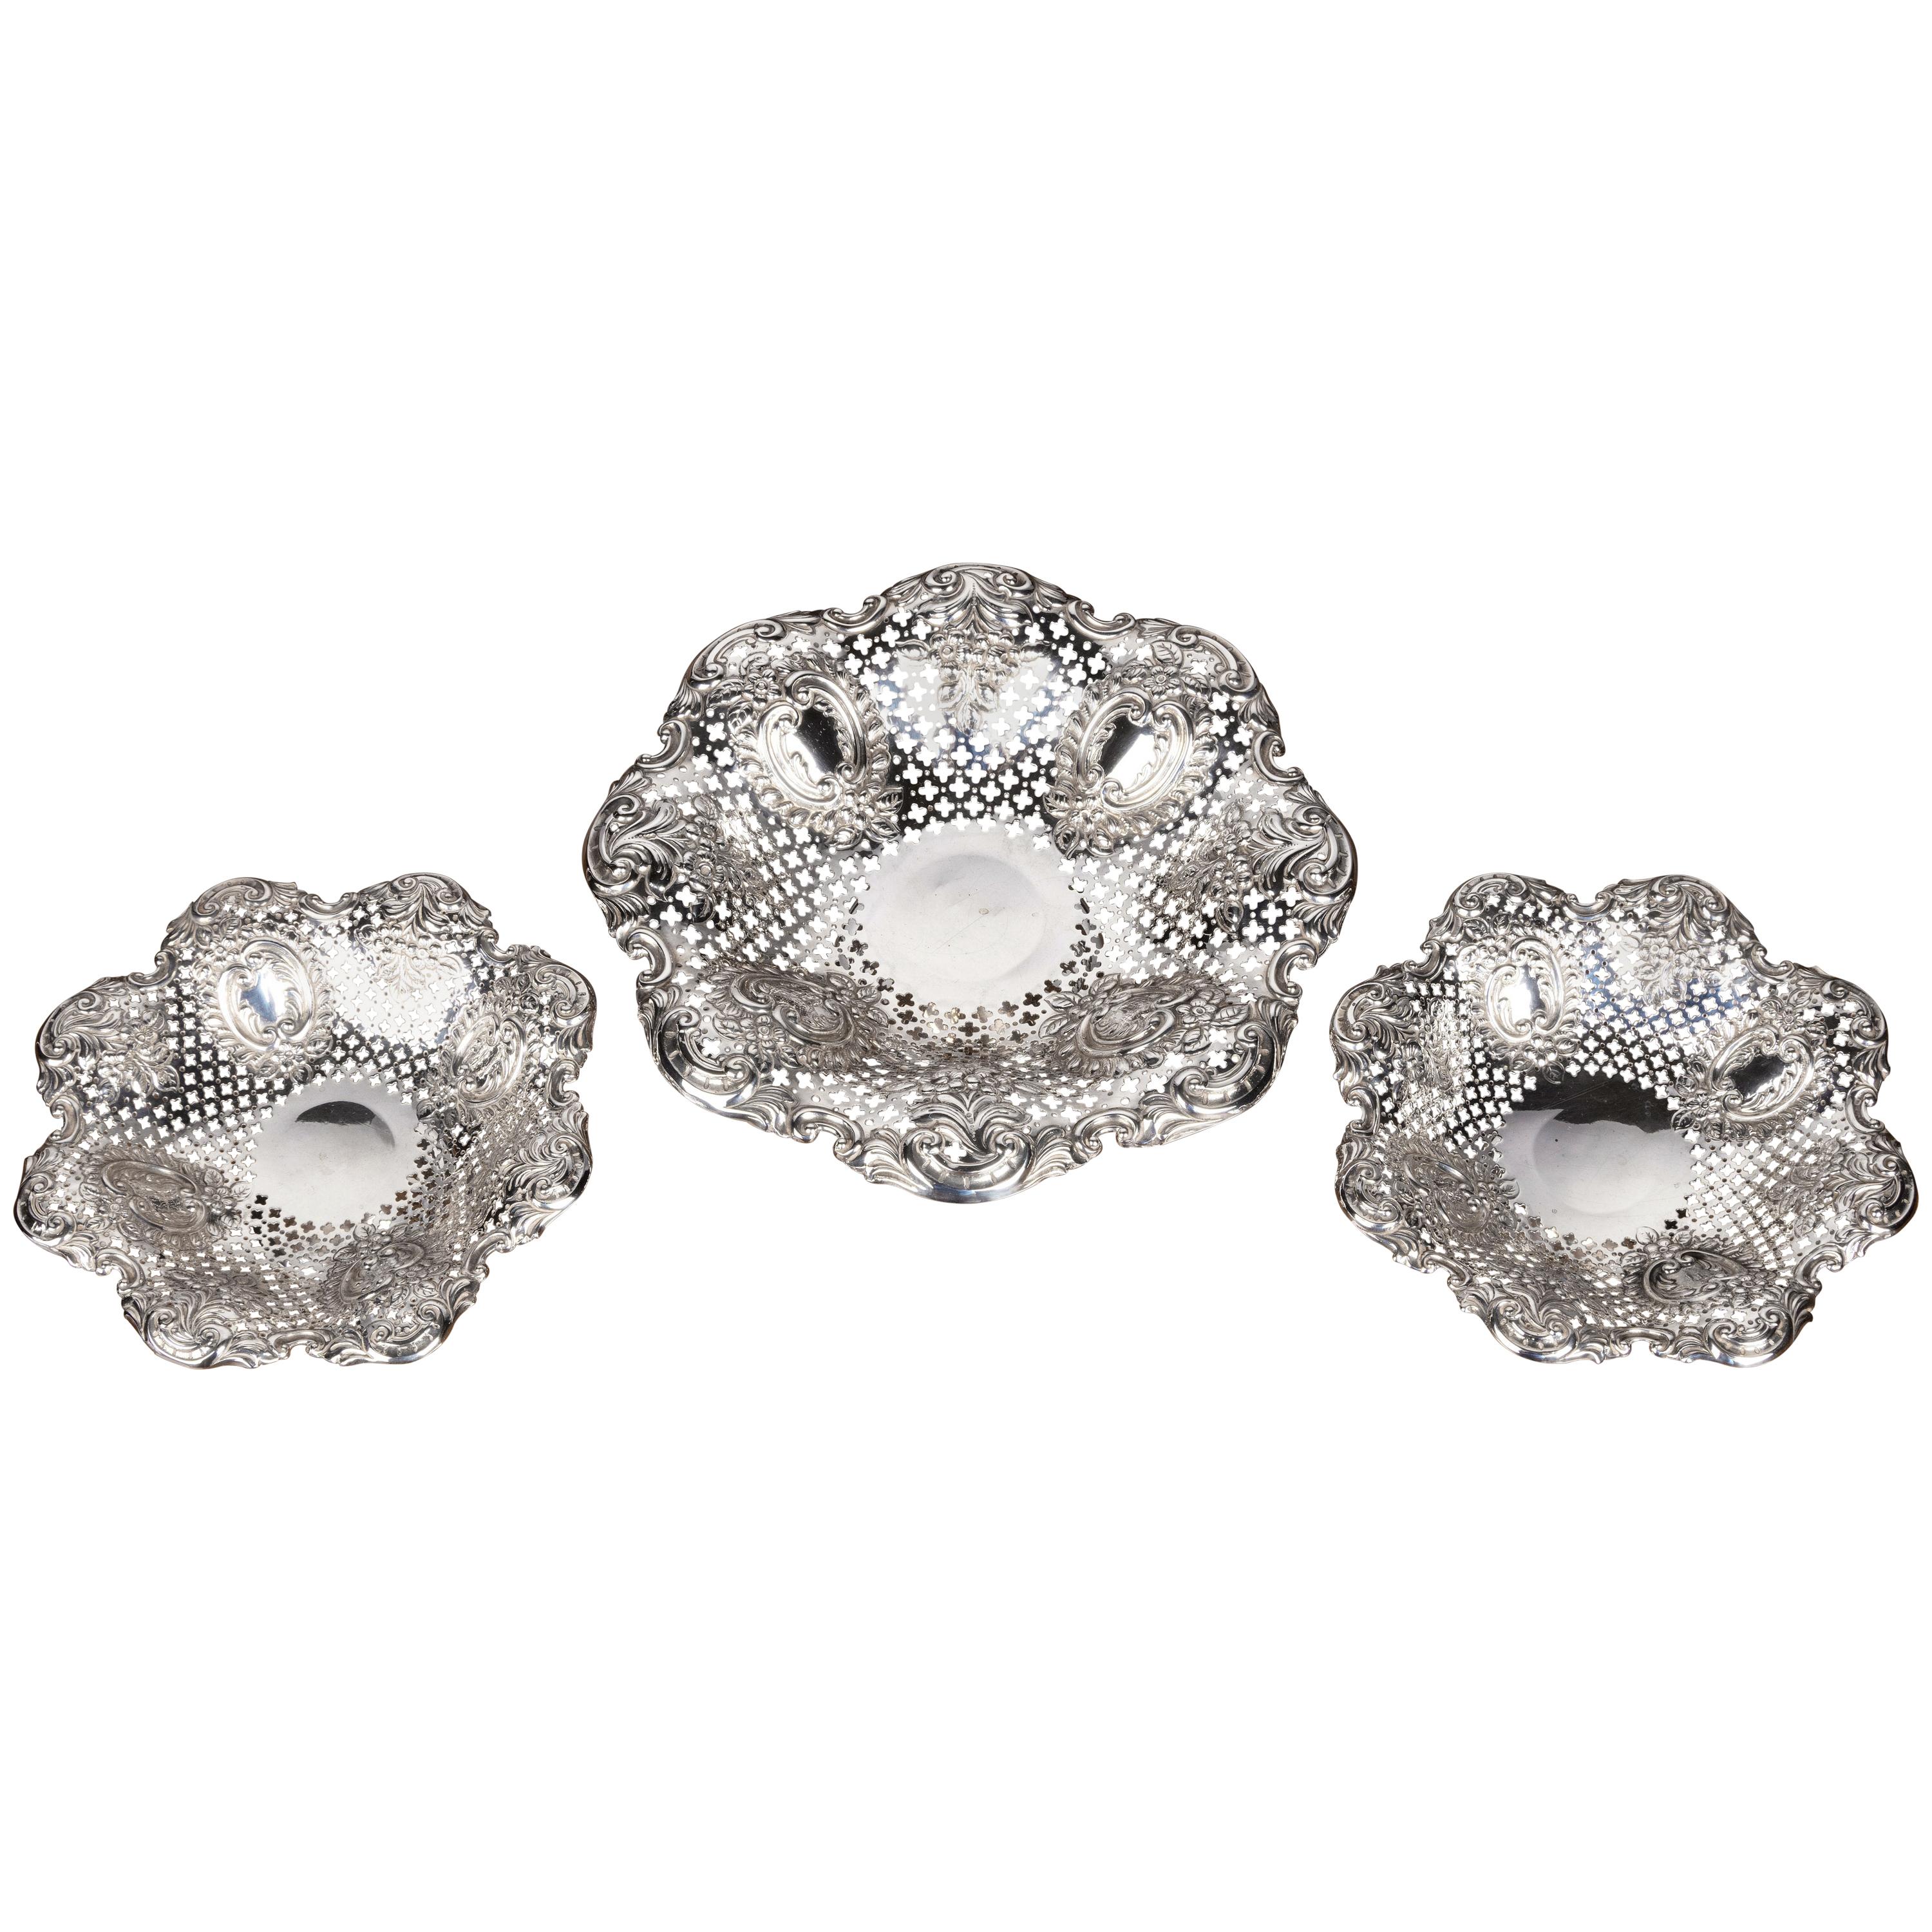 Most Attractive Suite of Three Late 19th Century Silver Pierced and Fluted Dis